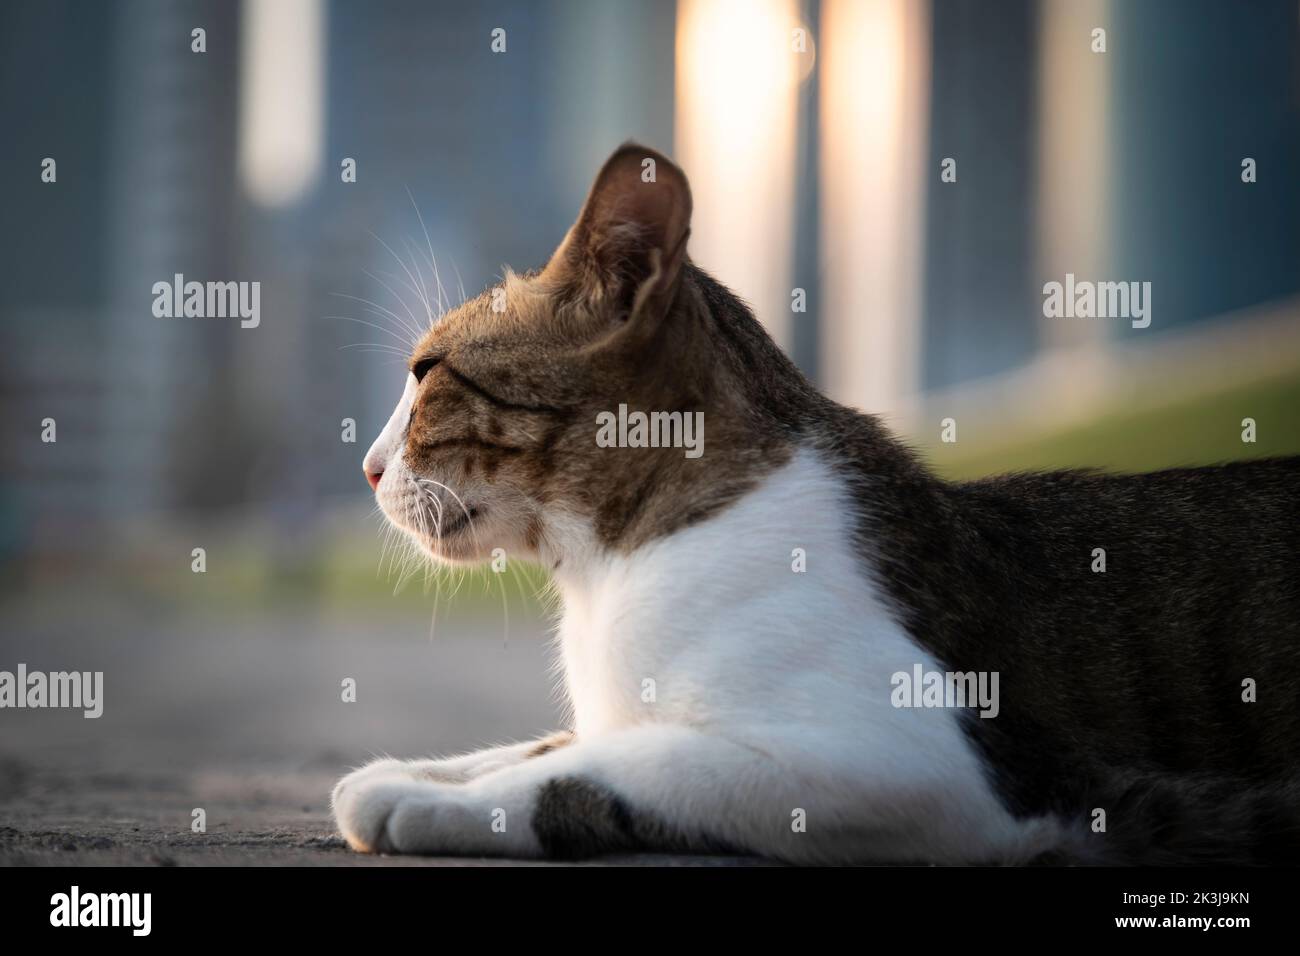 Adorable Calico cat lying on the street Stock Photo